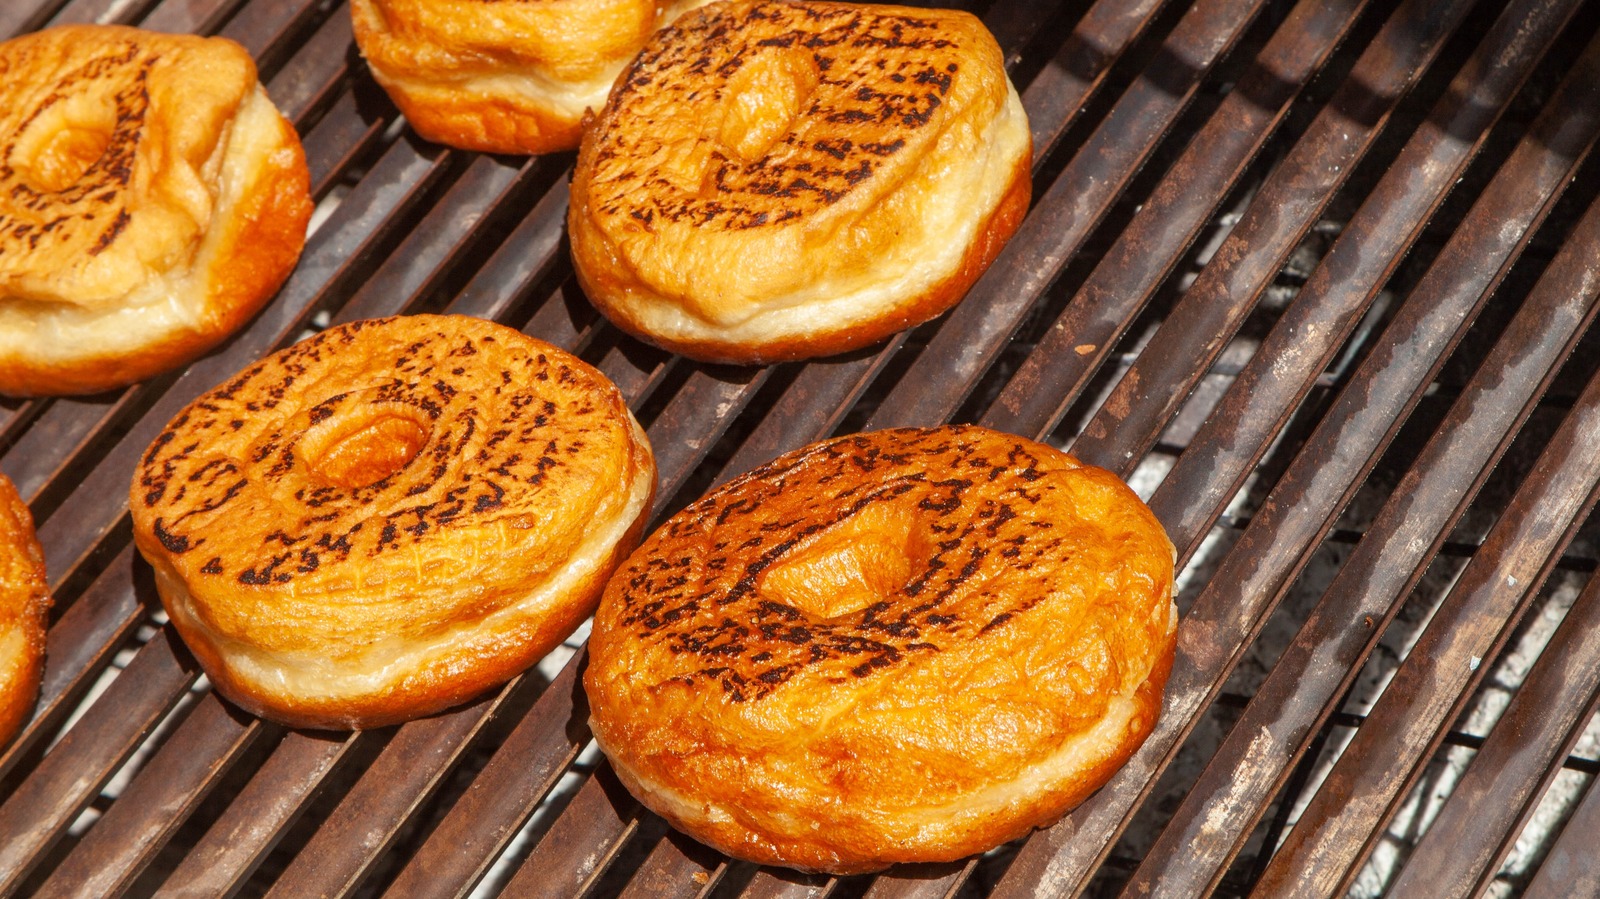 Throw That Old Donut On The Grill And Thank Us Later